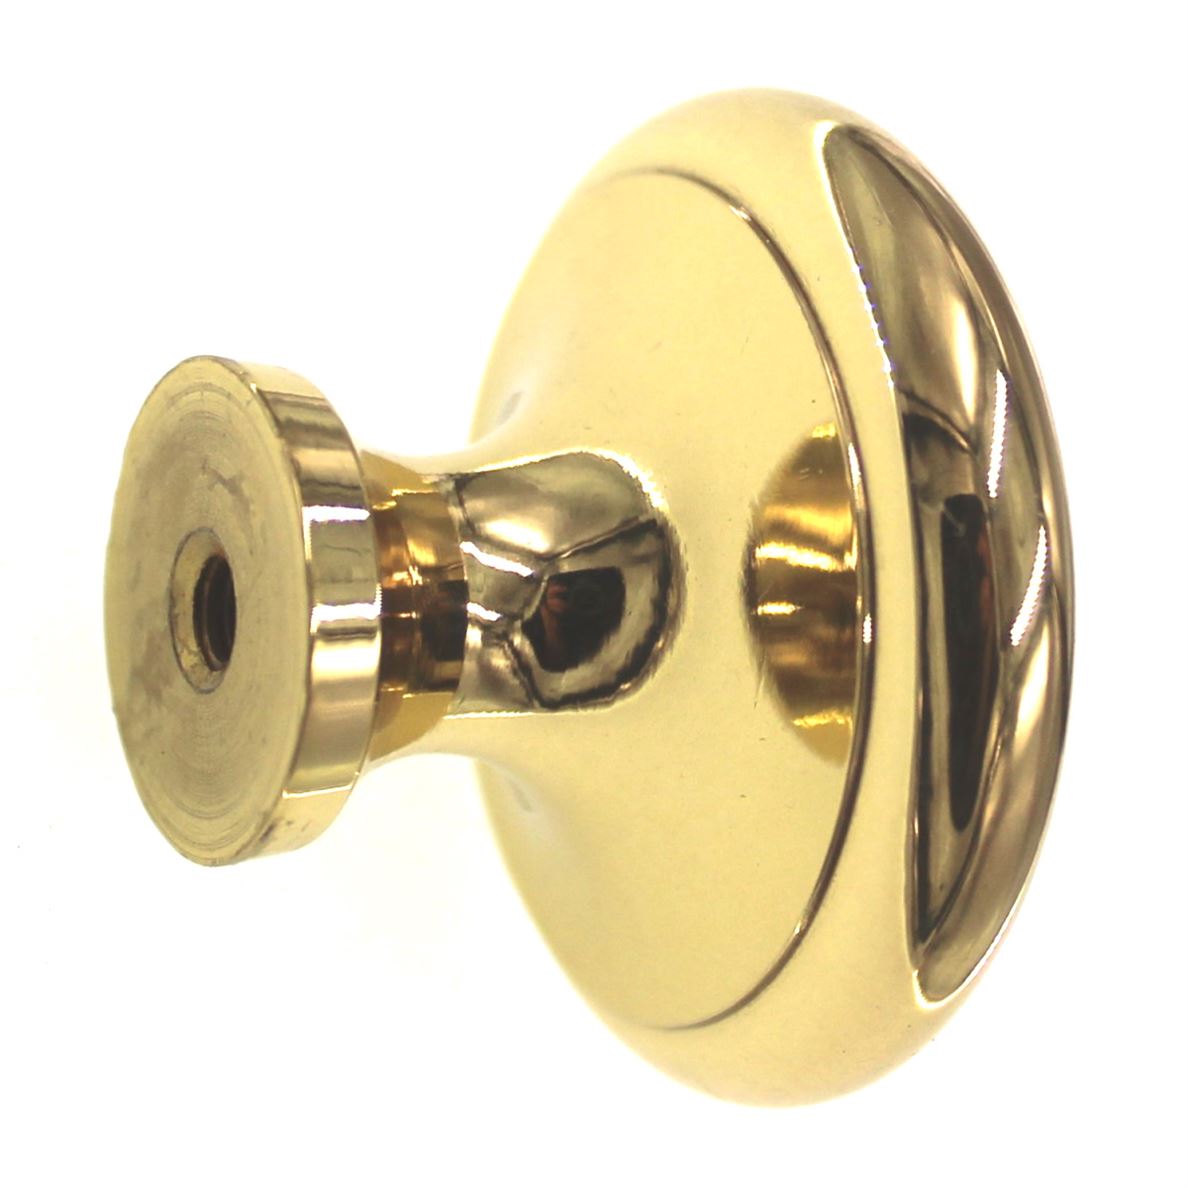 Amerock Colonial Polished Brass Solid Brass 1 1/2" Round Cabinet Knob BP1431-3